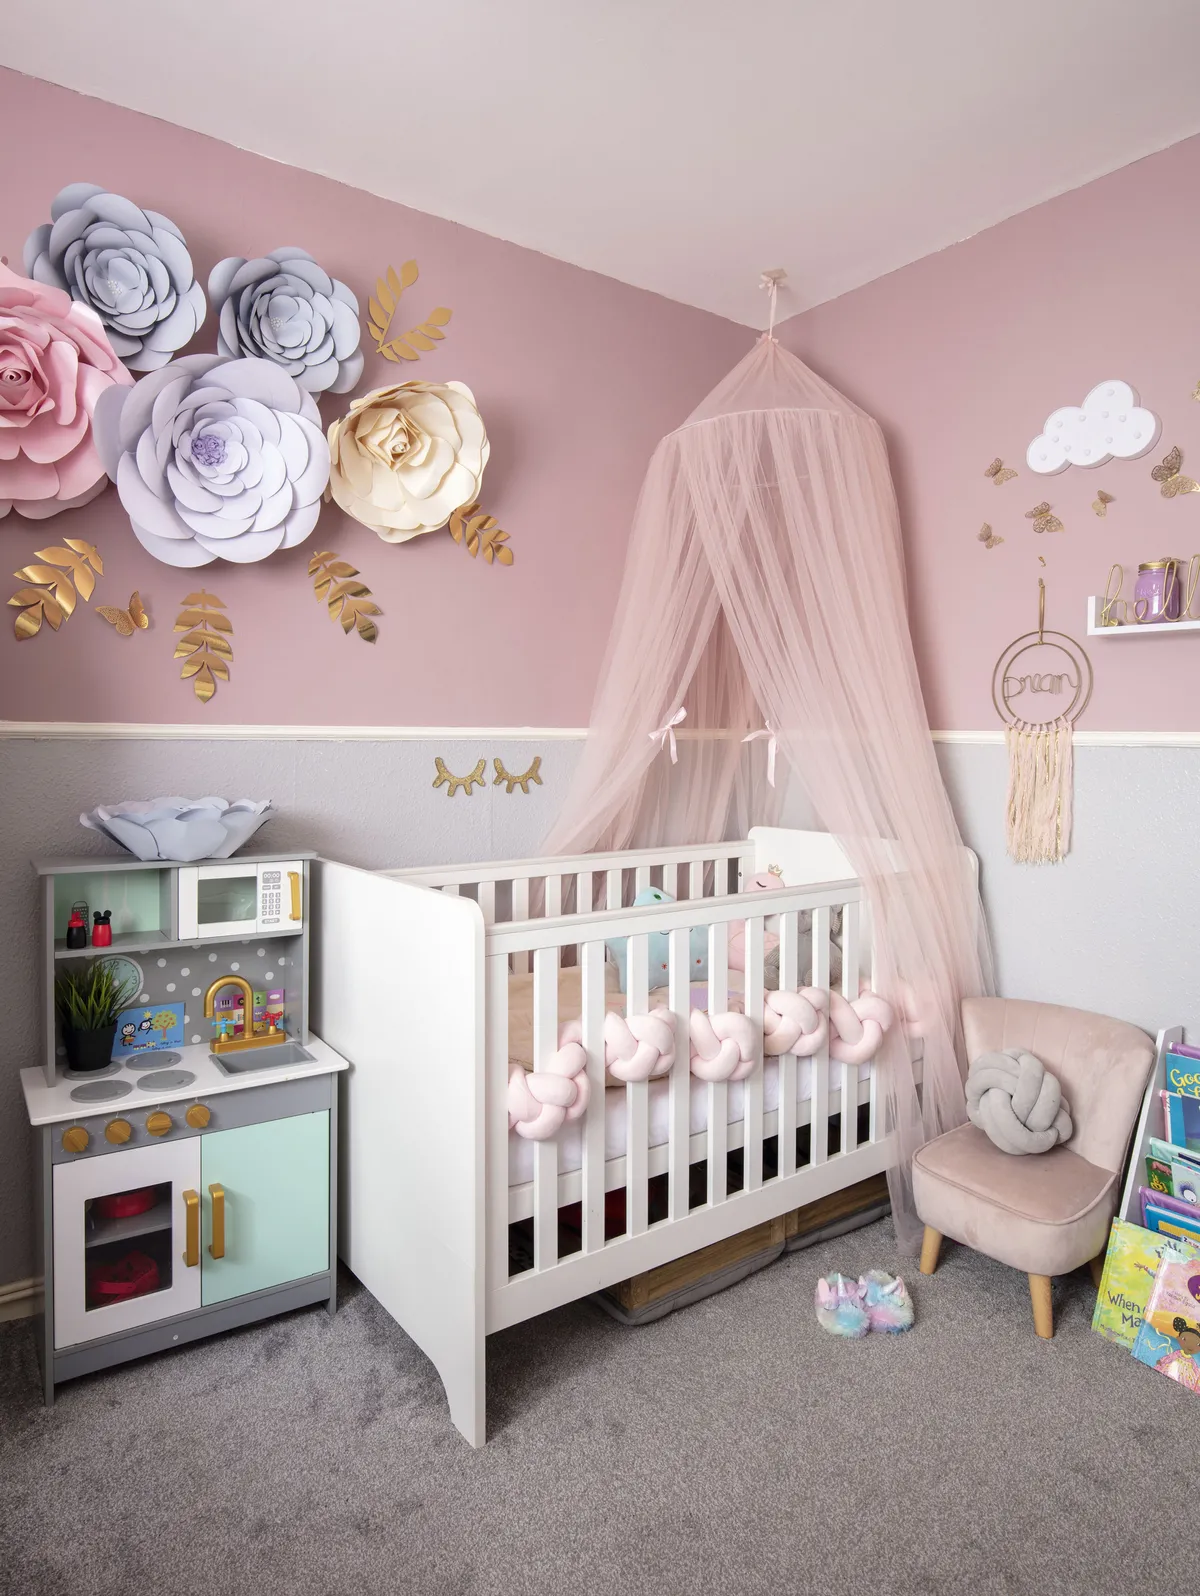 Jumbo paper flowers and a canopy create a fairytale feel in Amaal’s room. After the arrival of Adam, Alimah plans to update it to suit them both. ‘It’s going to be decorated with two big murals for each of them,’ she says